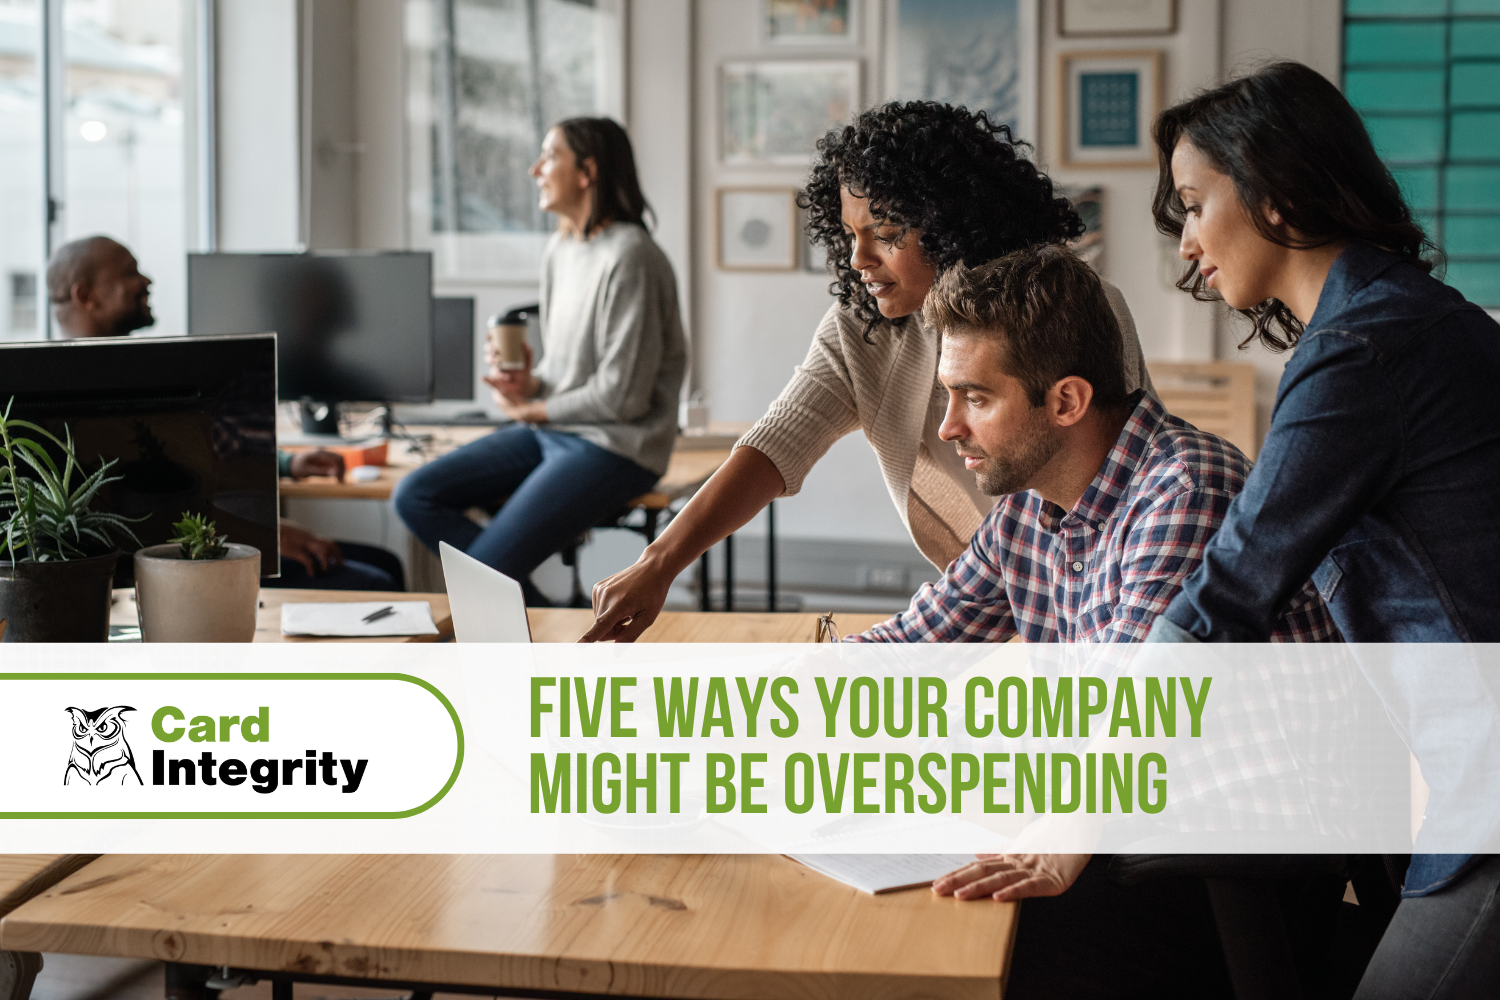 Five Ways Your Company Might Be Overspending